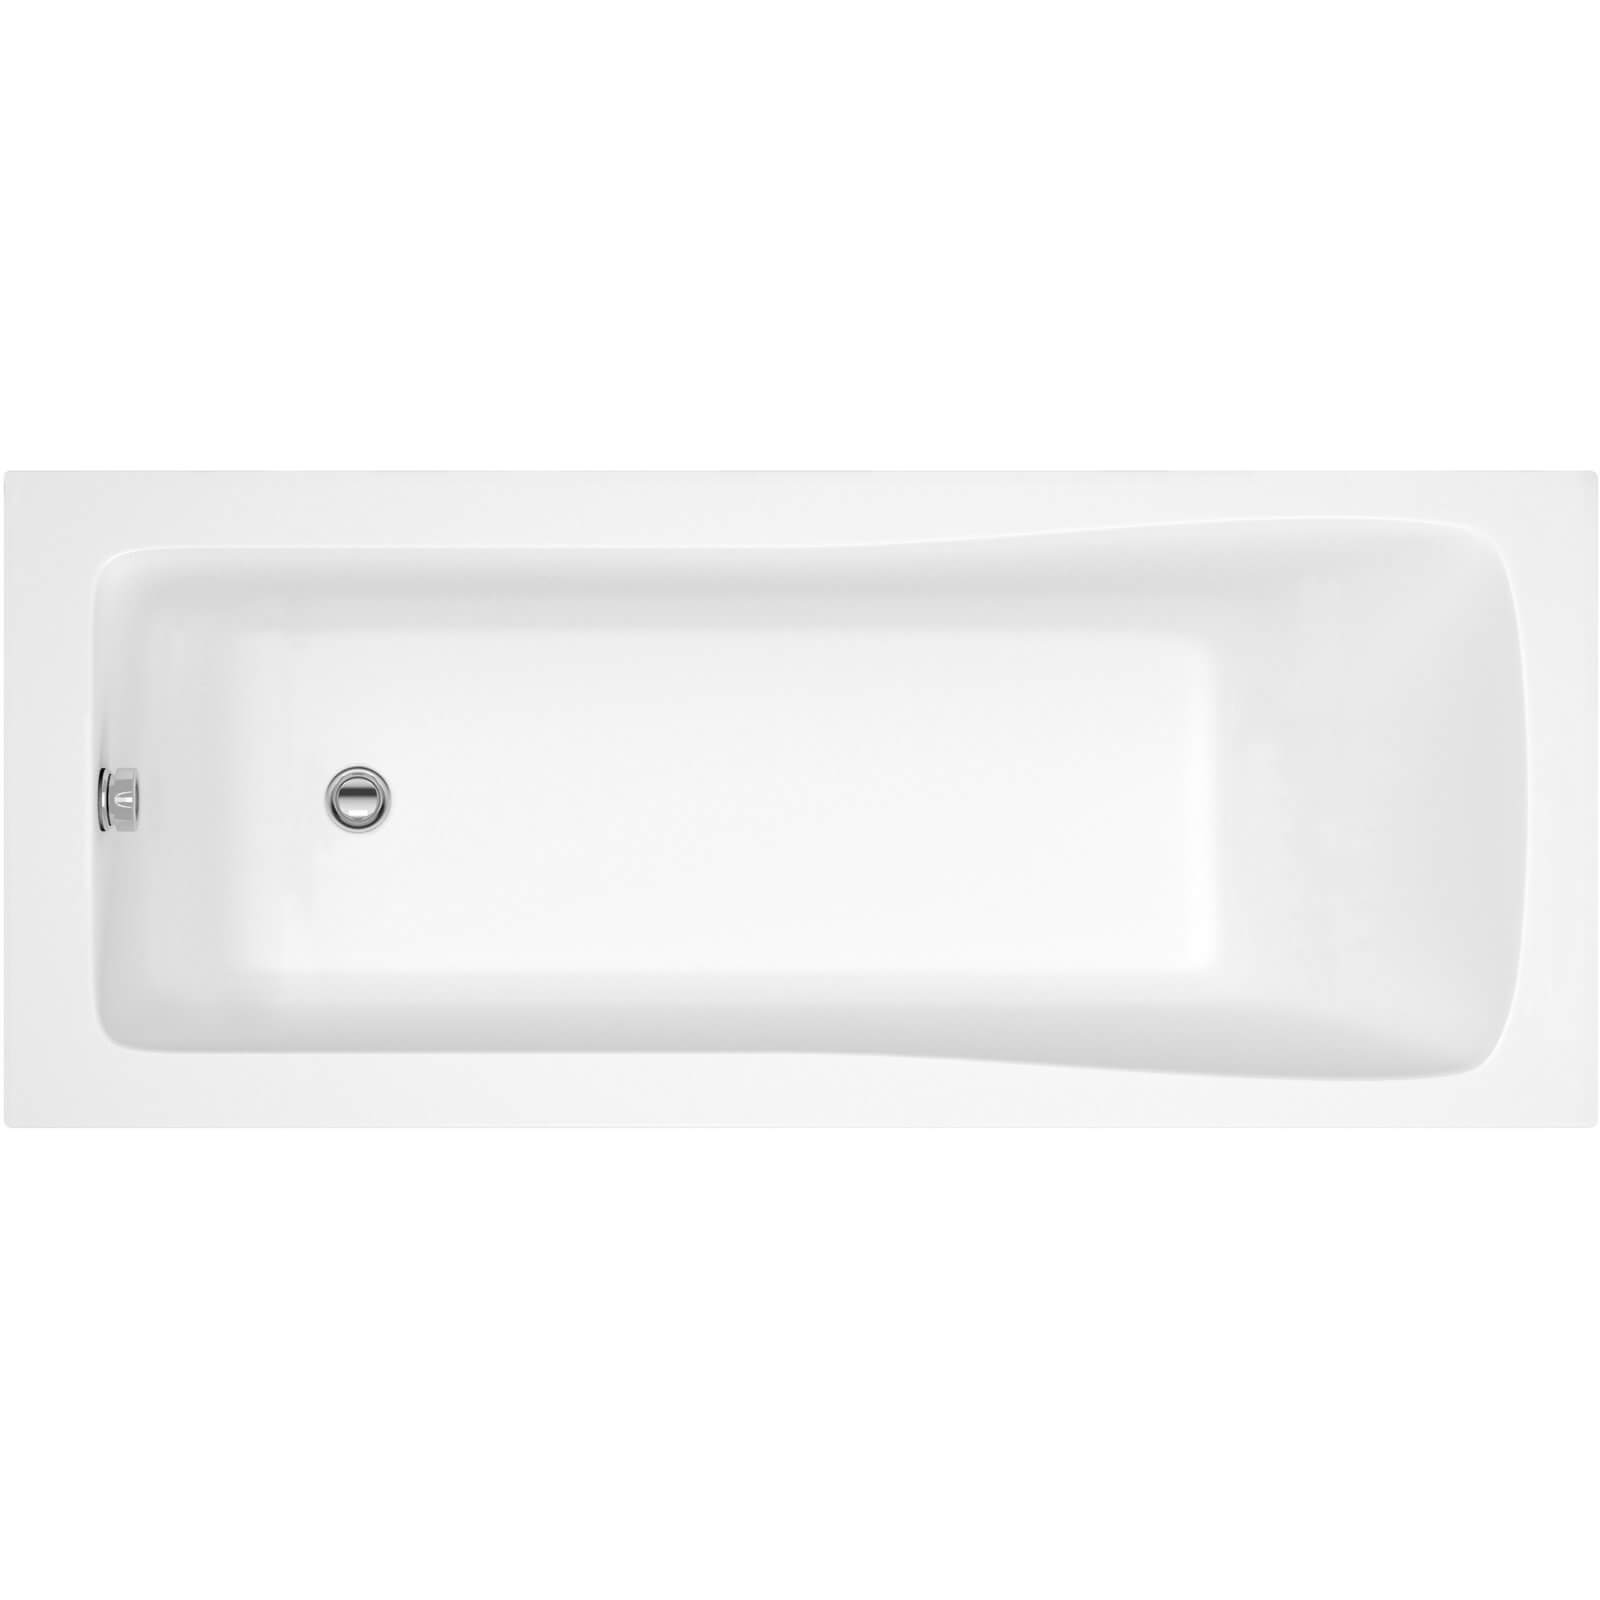 Photo of Balterley Square Single Ended Bath - 1400 X 700mm